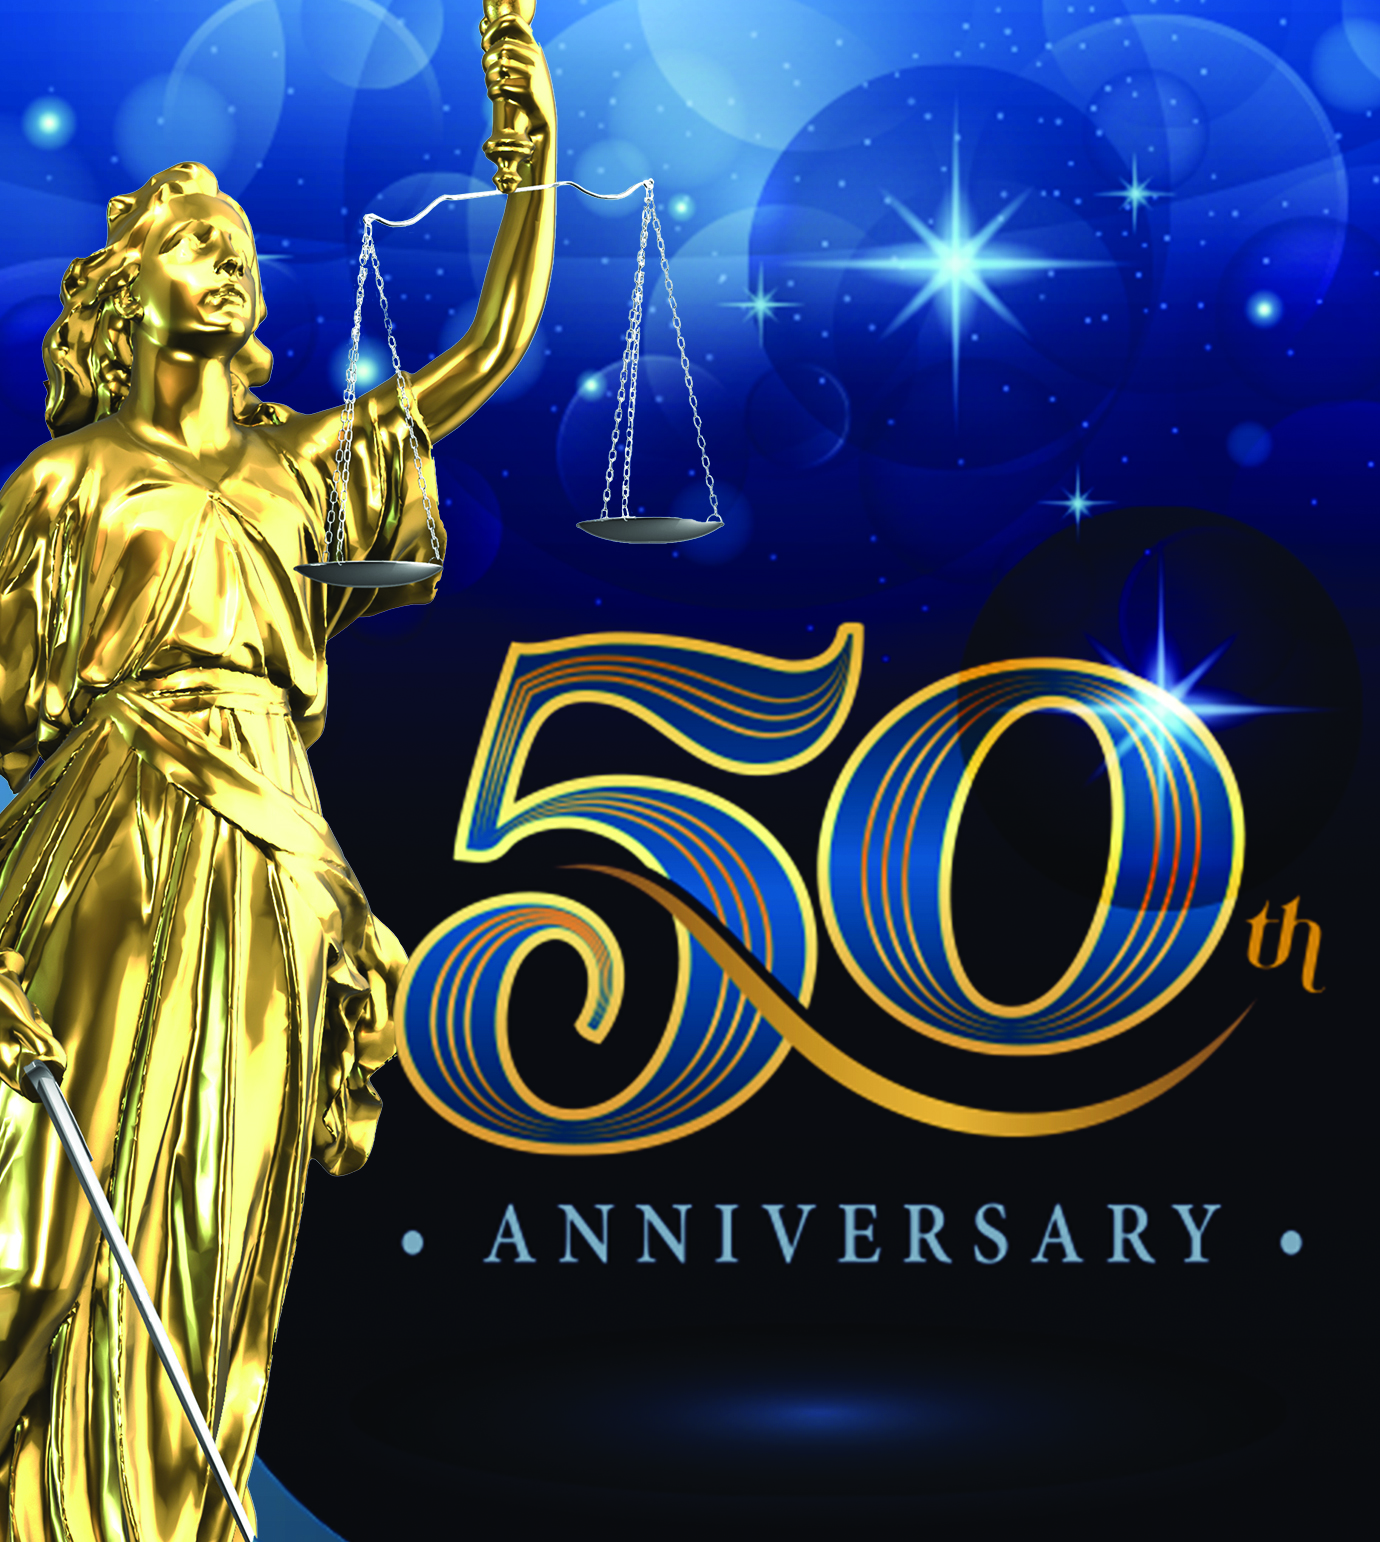 Lady Justice 50th anniversary logo